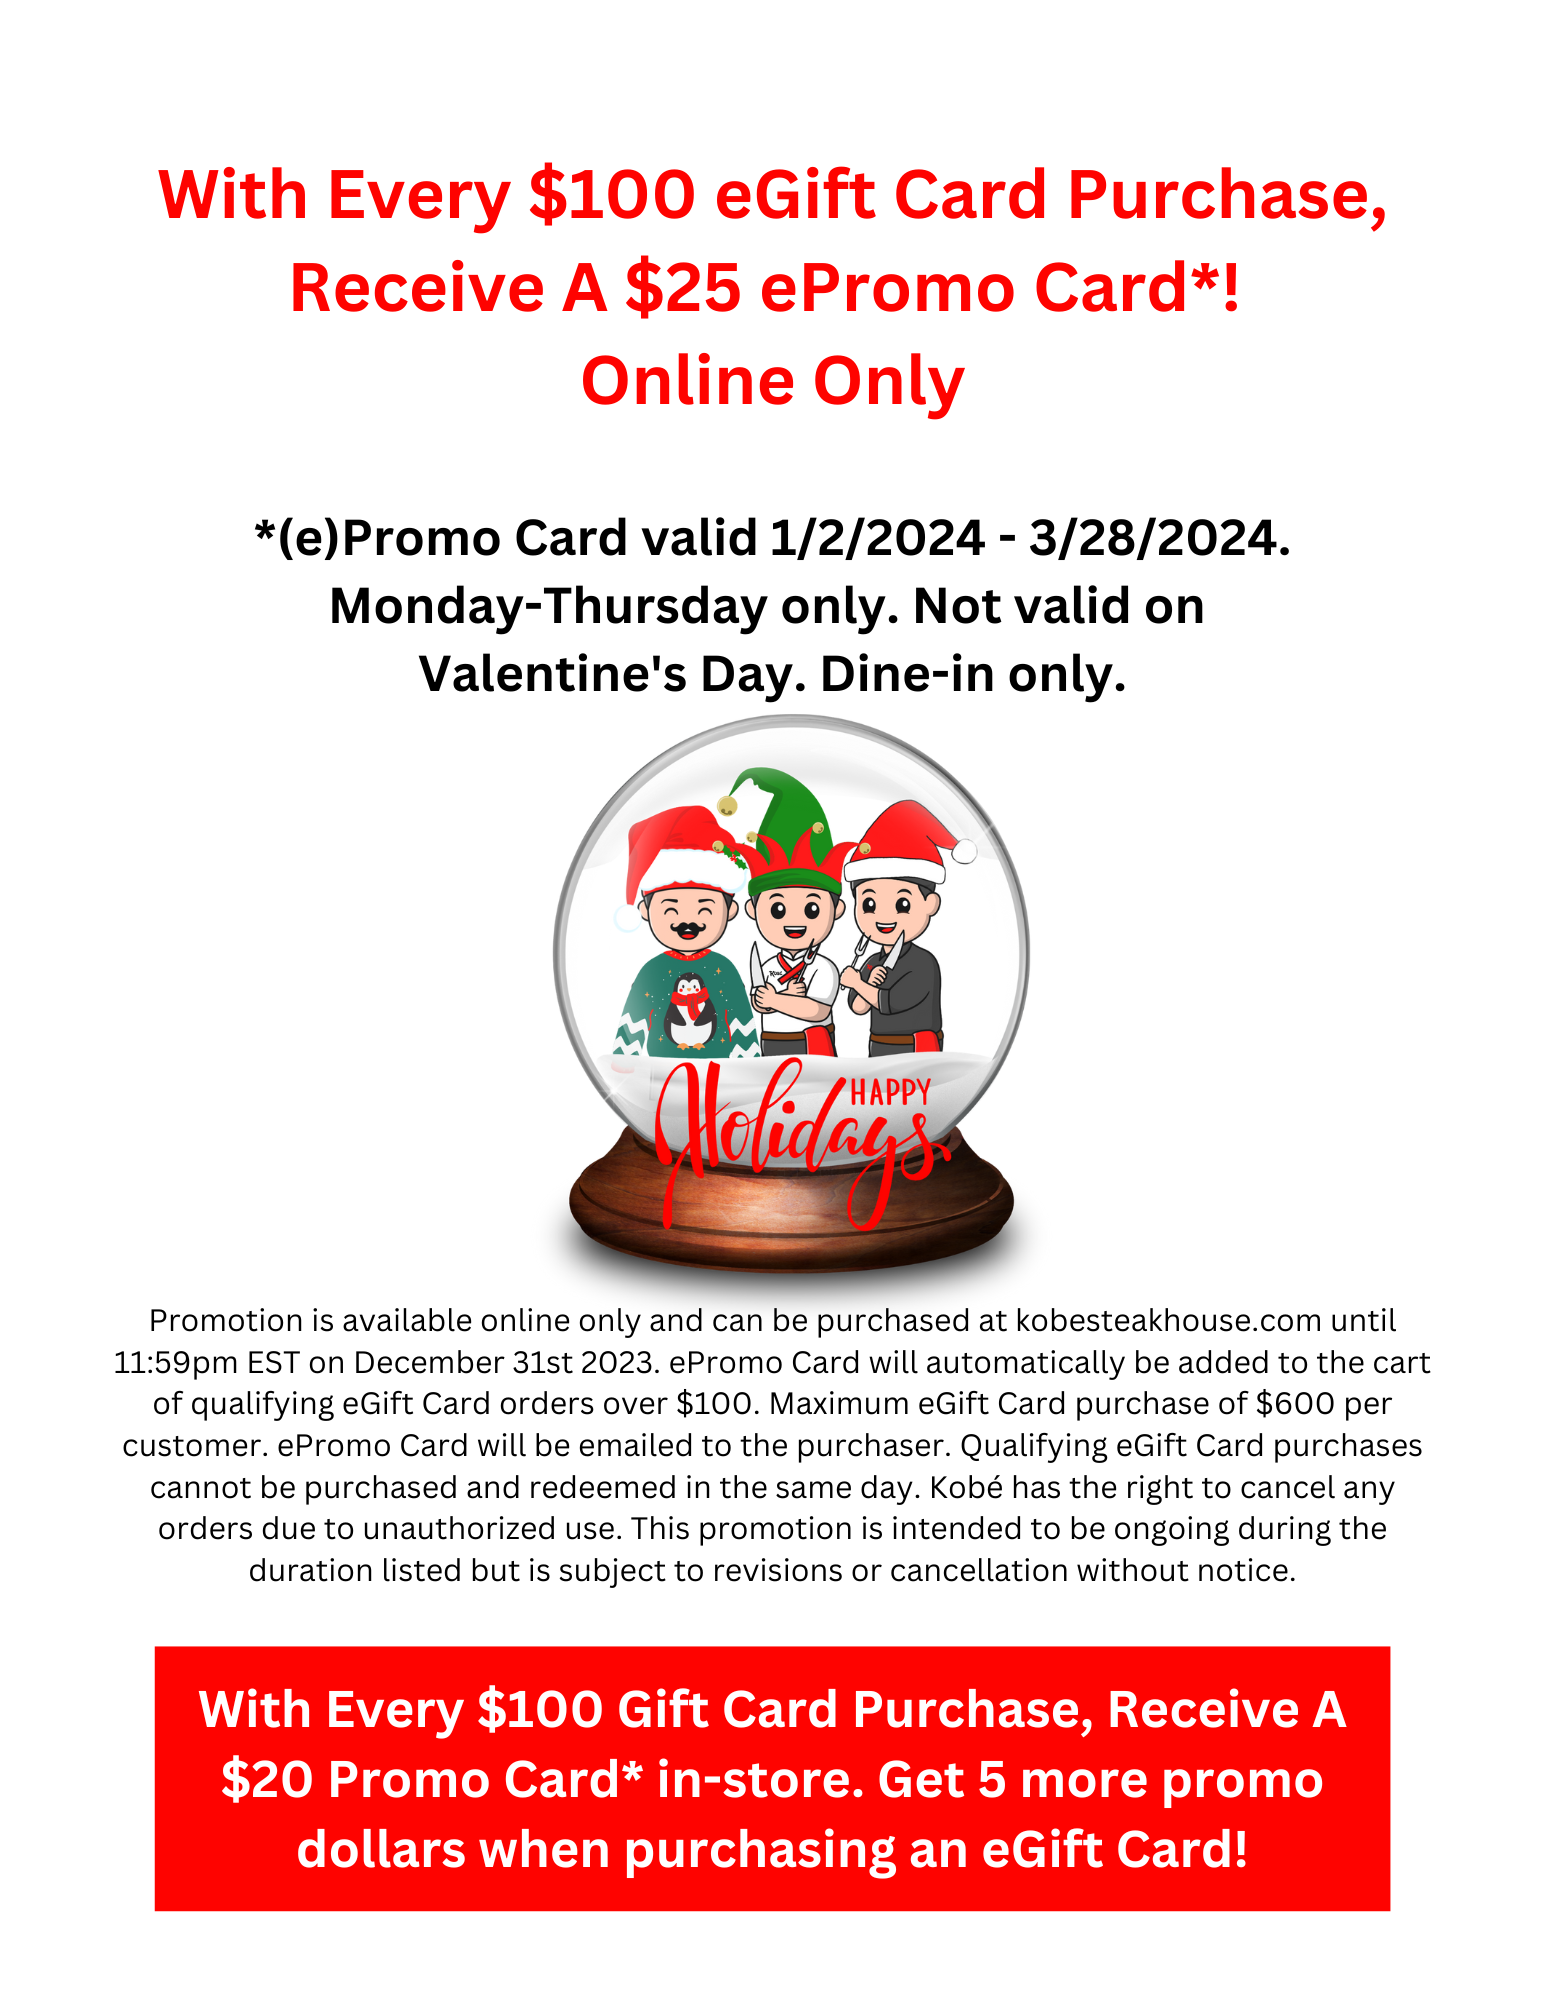 With Every $100 eGift Card Purchase, Receive A $25 ePromo Card*! 
Online Only  *(e)Promo Card valid 1/2/2024 - 3/28/2024. Monday-Thursday only. Not valid on 
Valentine's Day. Dine-in only.  Promotion is available online only and can be purchased at kobesteakhouse.com until 11:59pm EST on December 31st 2023. ePromo Card will automatically be added to the cart of qualifying eGift Card orders over $100. Maximum eGift Card purchase of $600 per customer. ePromo Card will be emailed to the purchaser. Qualifying eGift Card purchases cannot be purchased and redeemed in the same day. Kobé has the right to cancel any orders due to unauthorized use. This promotion is intended to be ongoing during the duration listed but is subject to revisions or cancellation without notice.  With Every $100 Gift Card Purchase, Receive A $20 Promo Card* in-store. Get 5 more promo dollars when purchasing an eGift Card!
